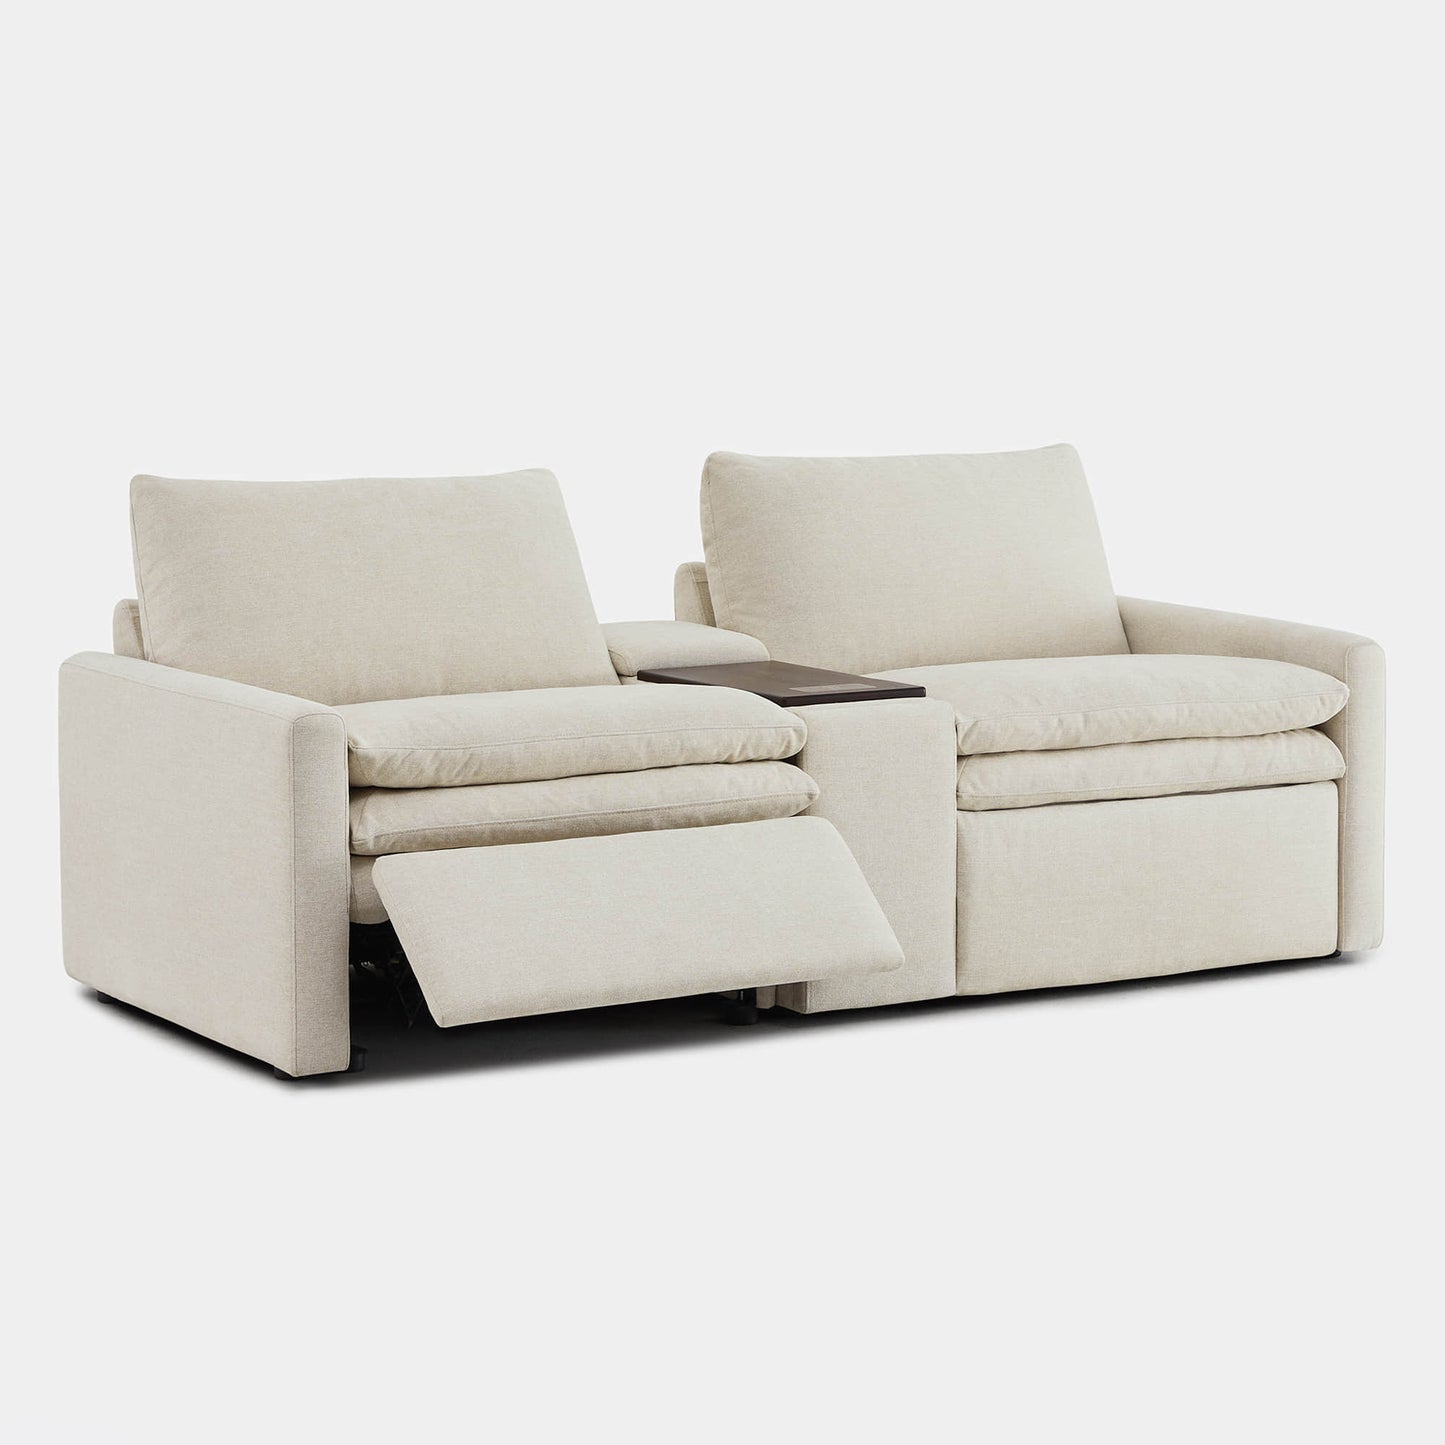 comfortable couches